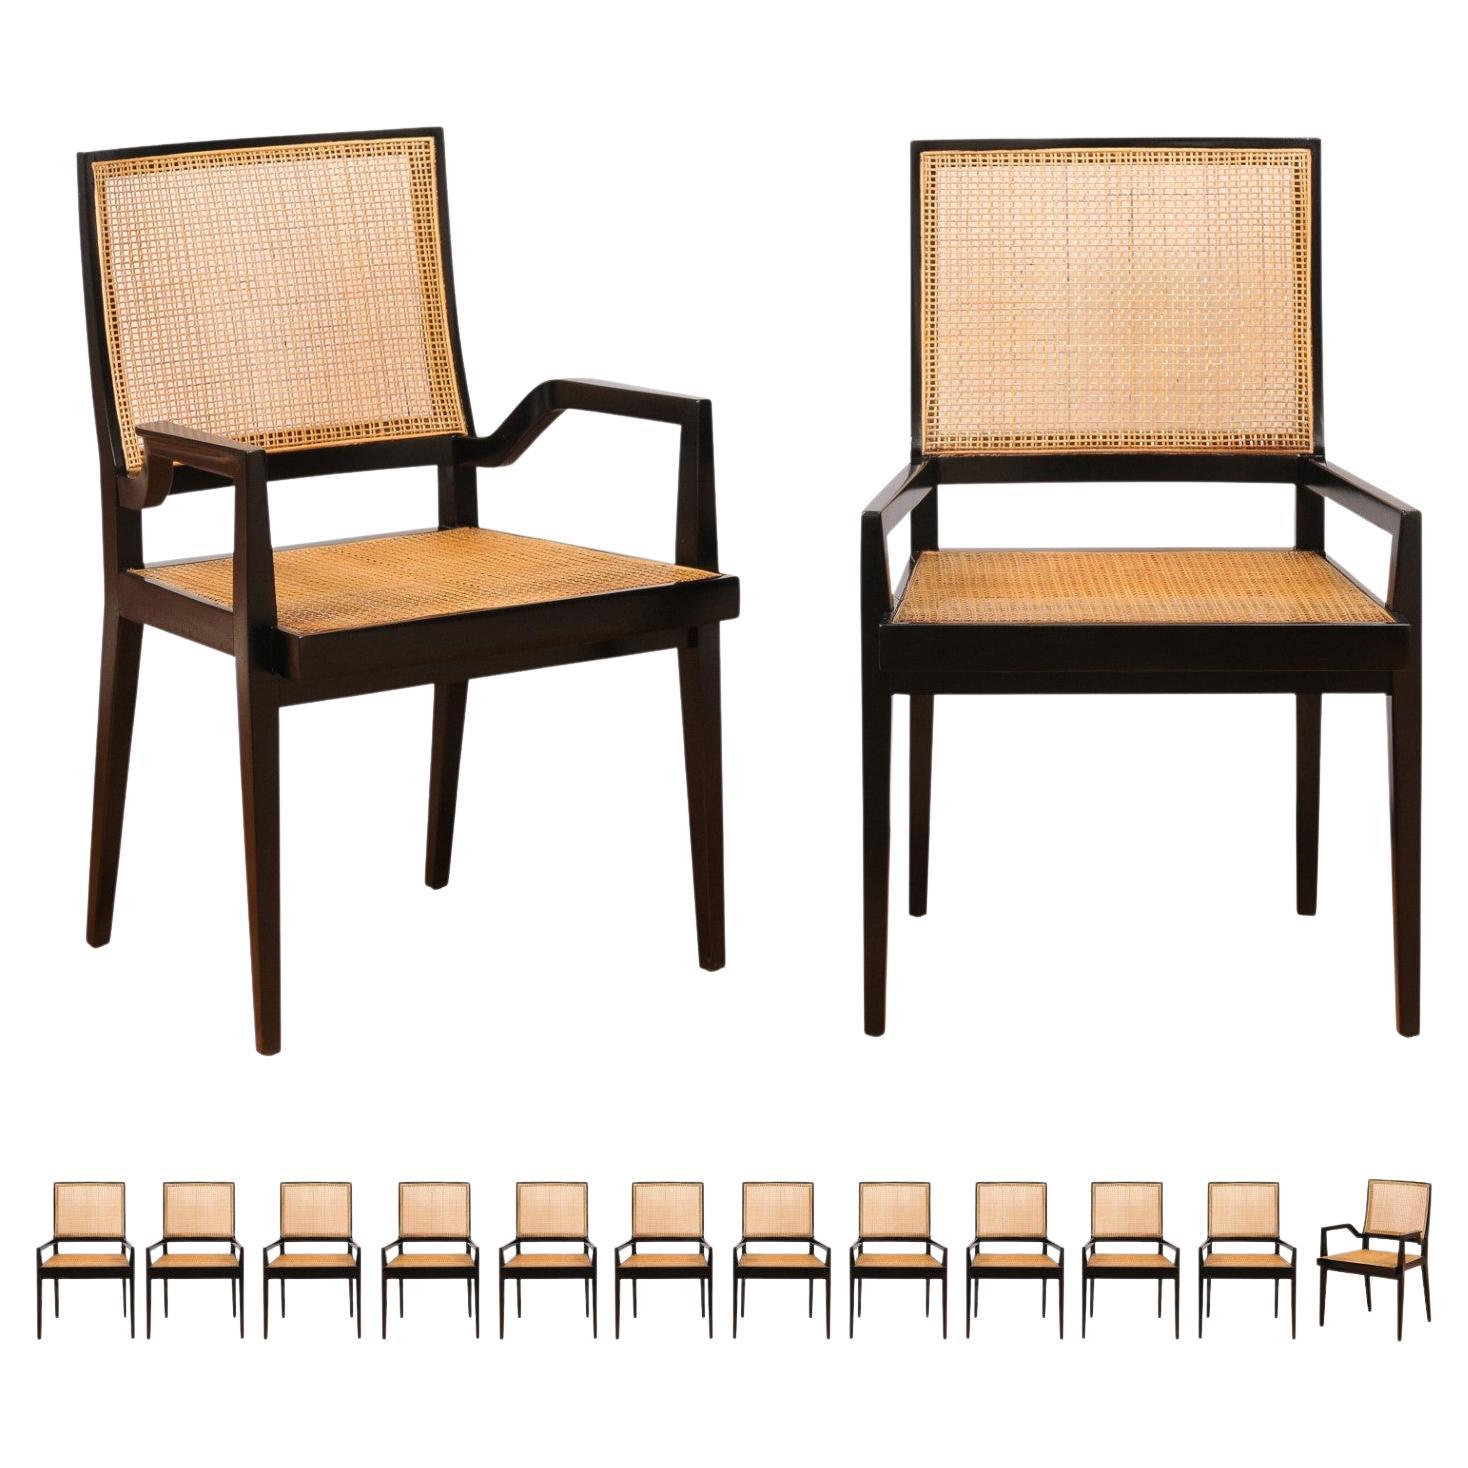 Spectacular Restored Set of 14 Sleek Double Cane Dining Chairs by Michael Taylor